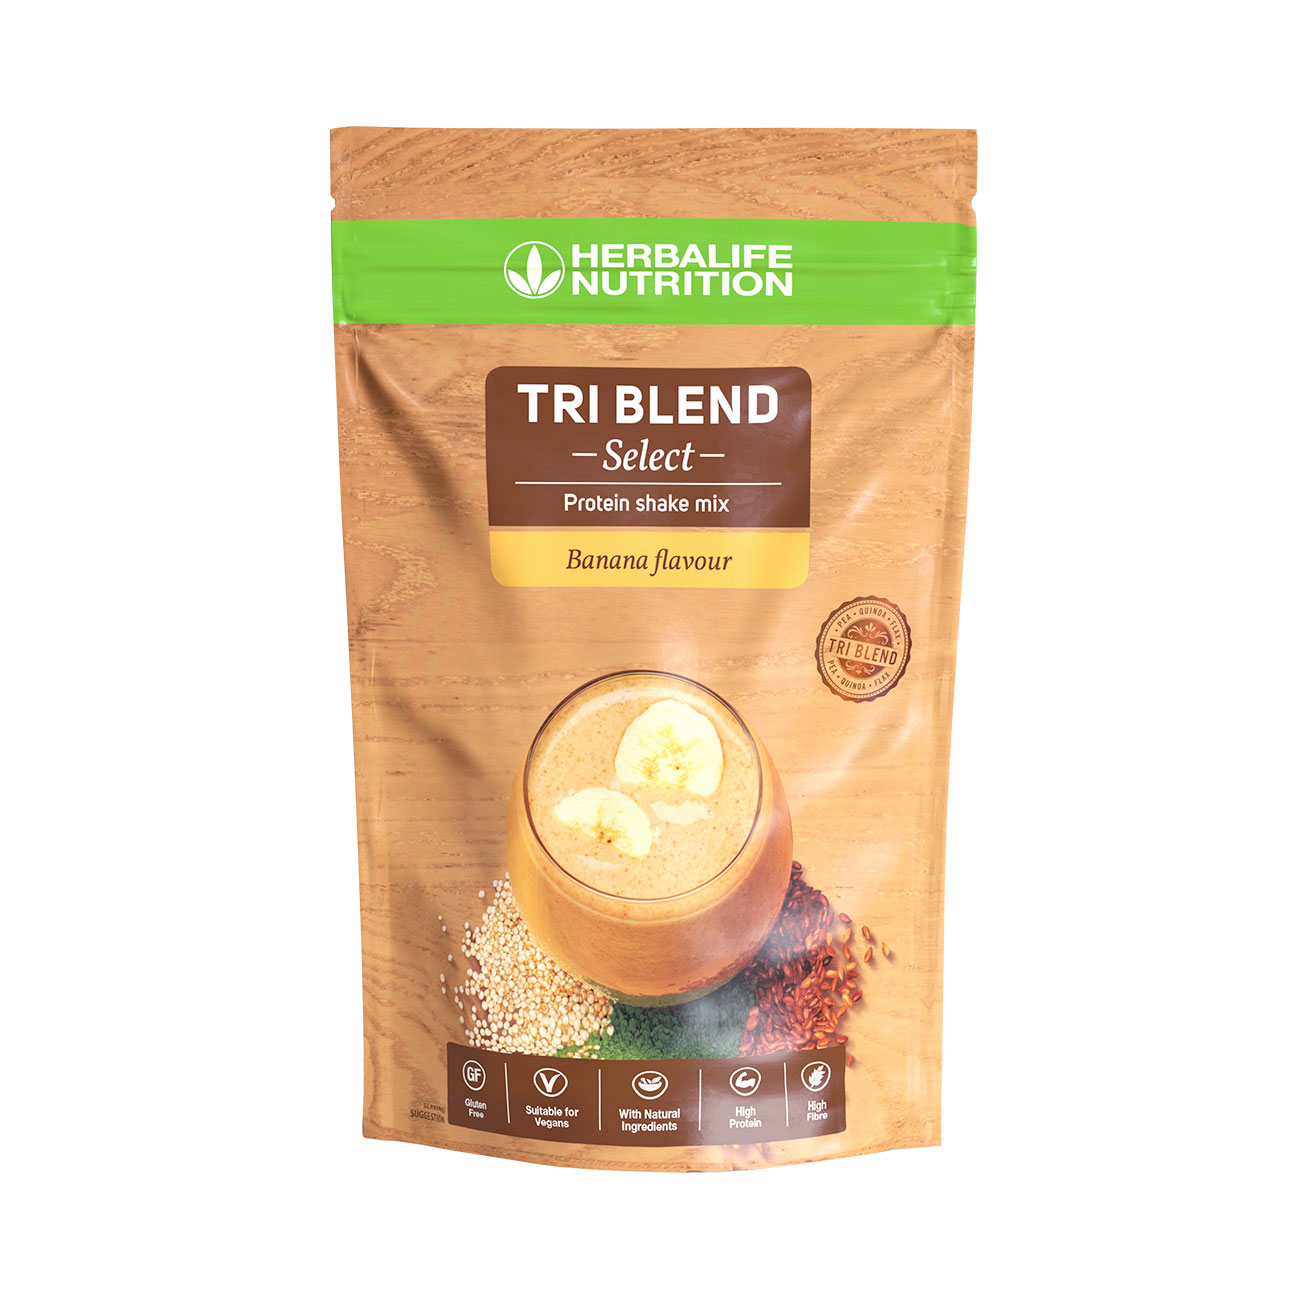 Tri Blend Select is a delicious, plant-based water-mixable shake that is low in sugar and high in protein and fibre.